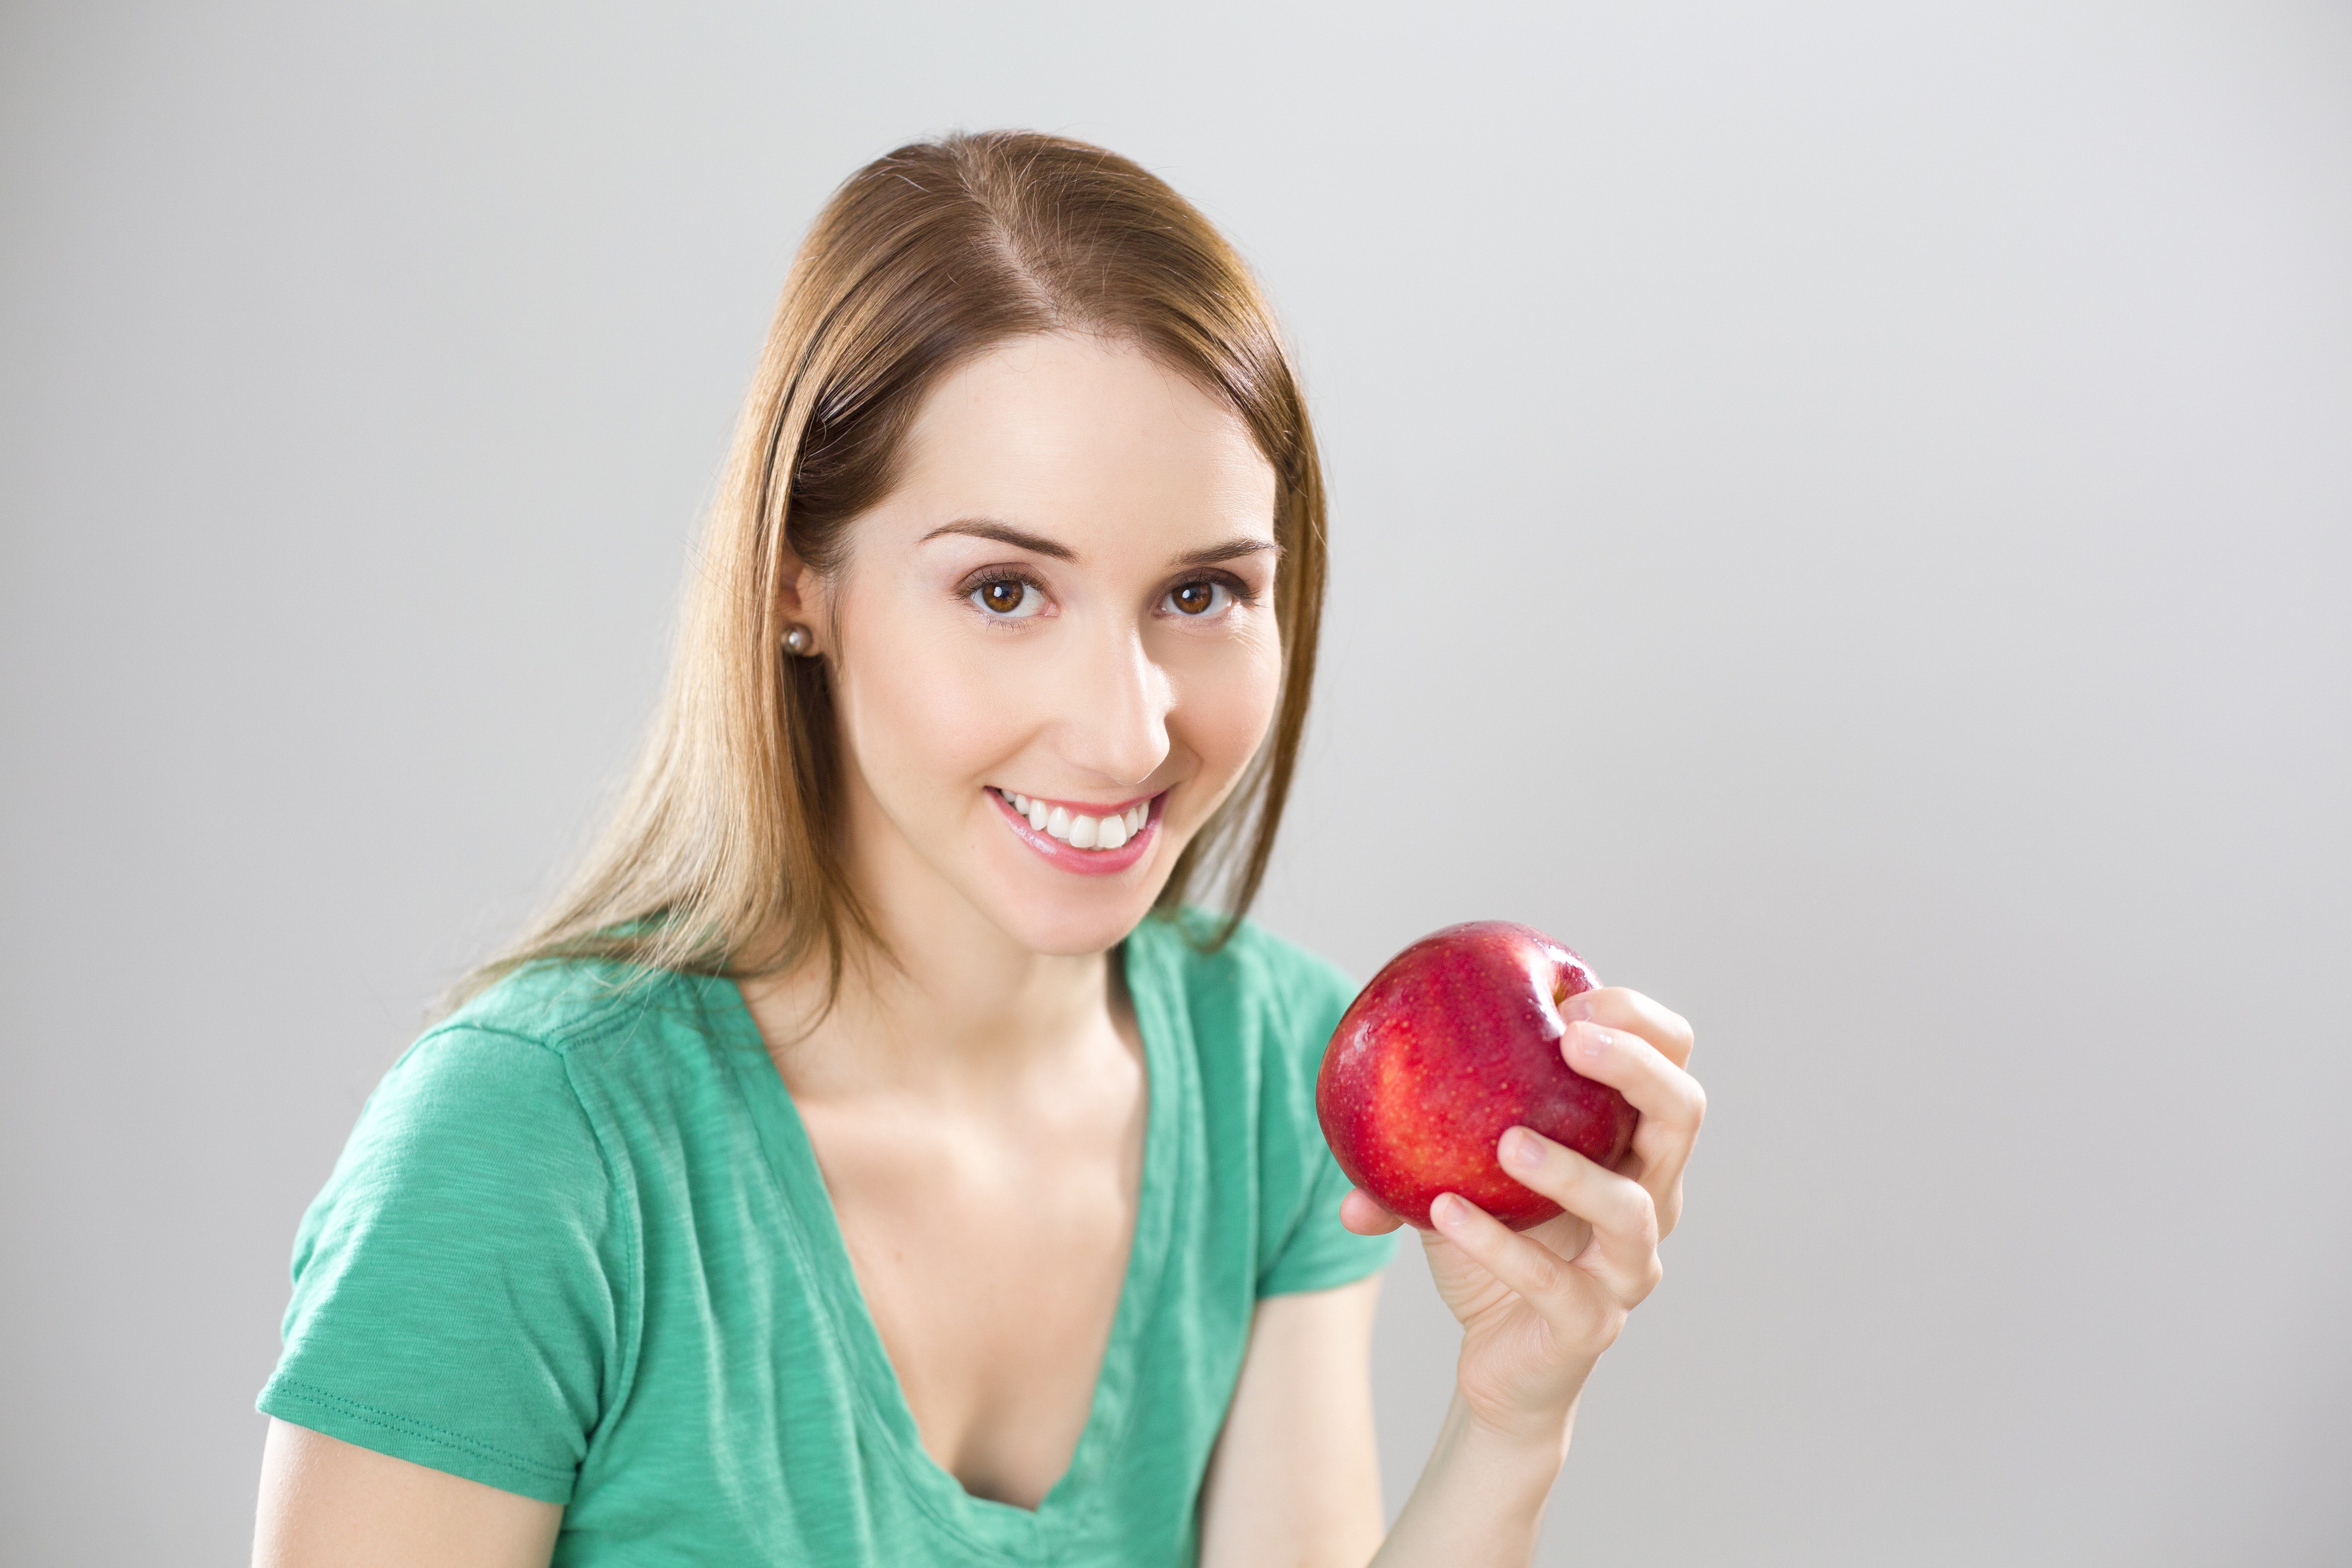 Portrait of Young Woman Eating Fruit Against White Background, Adolescent, Indoors, Woman, Vitamin, HQ Photo